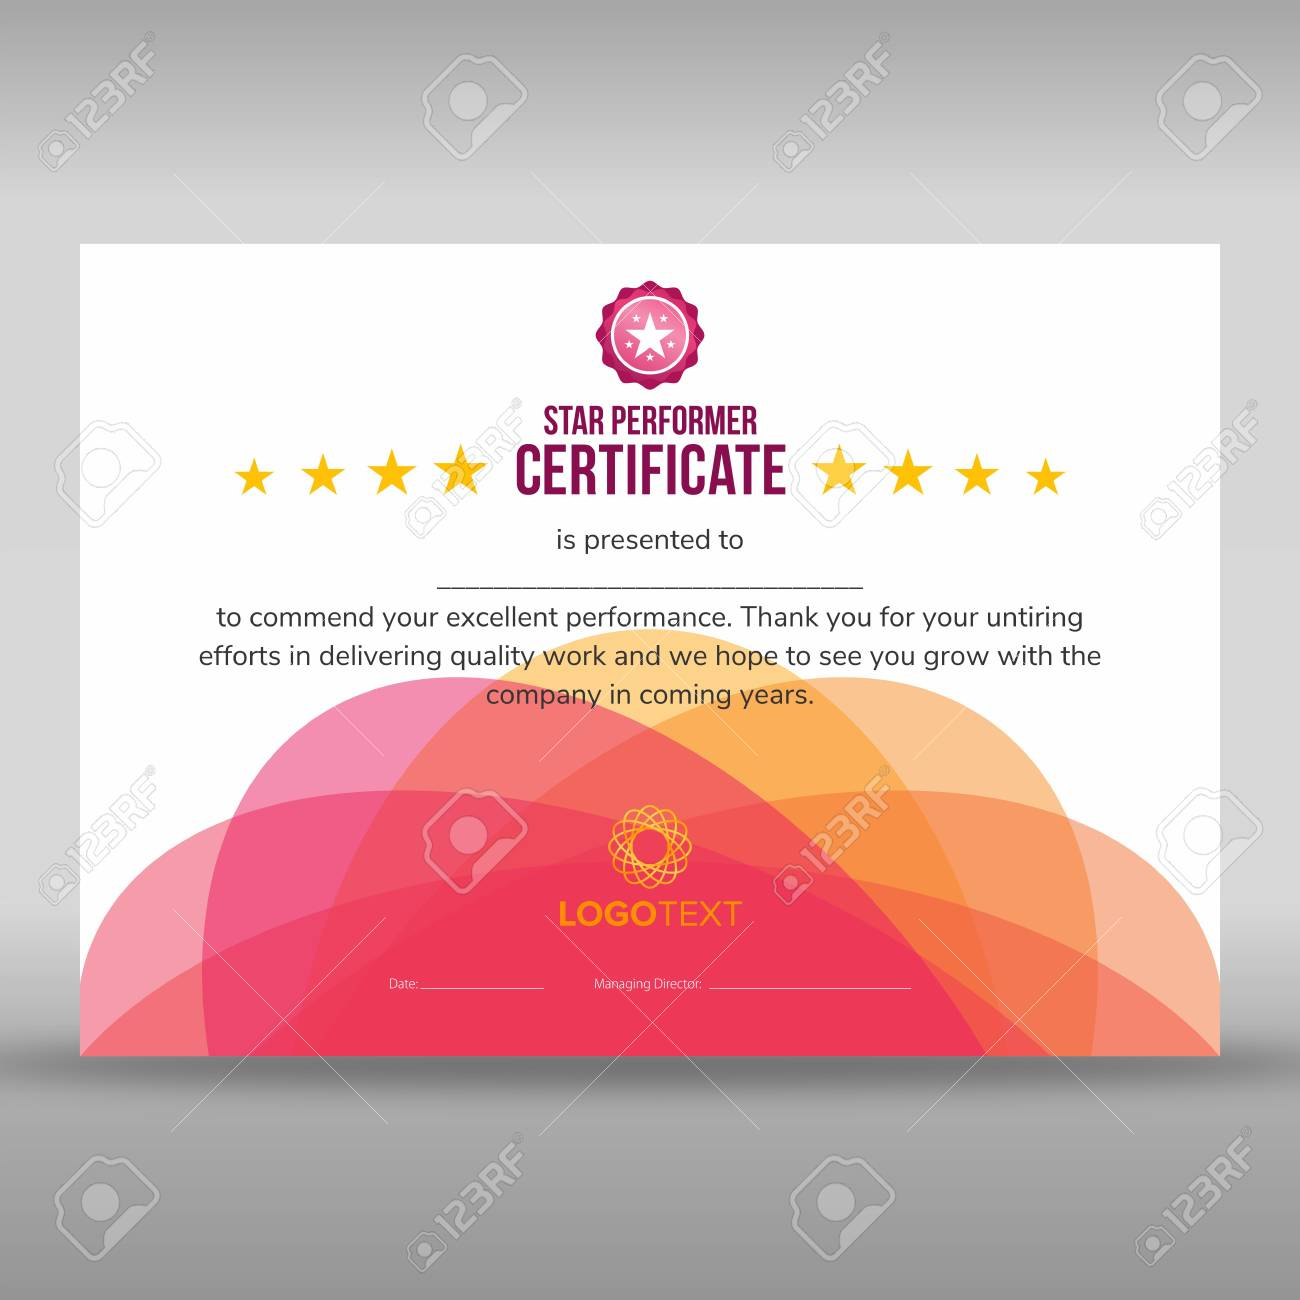 Abstract Creative Pink Star Performer Certificate With Star Performer Certificate Templates